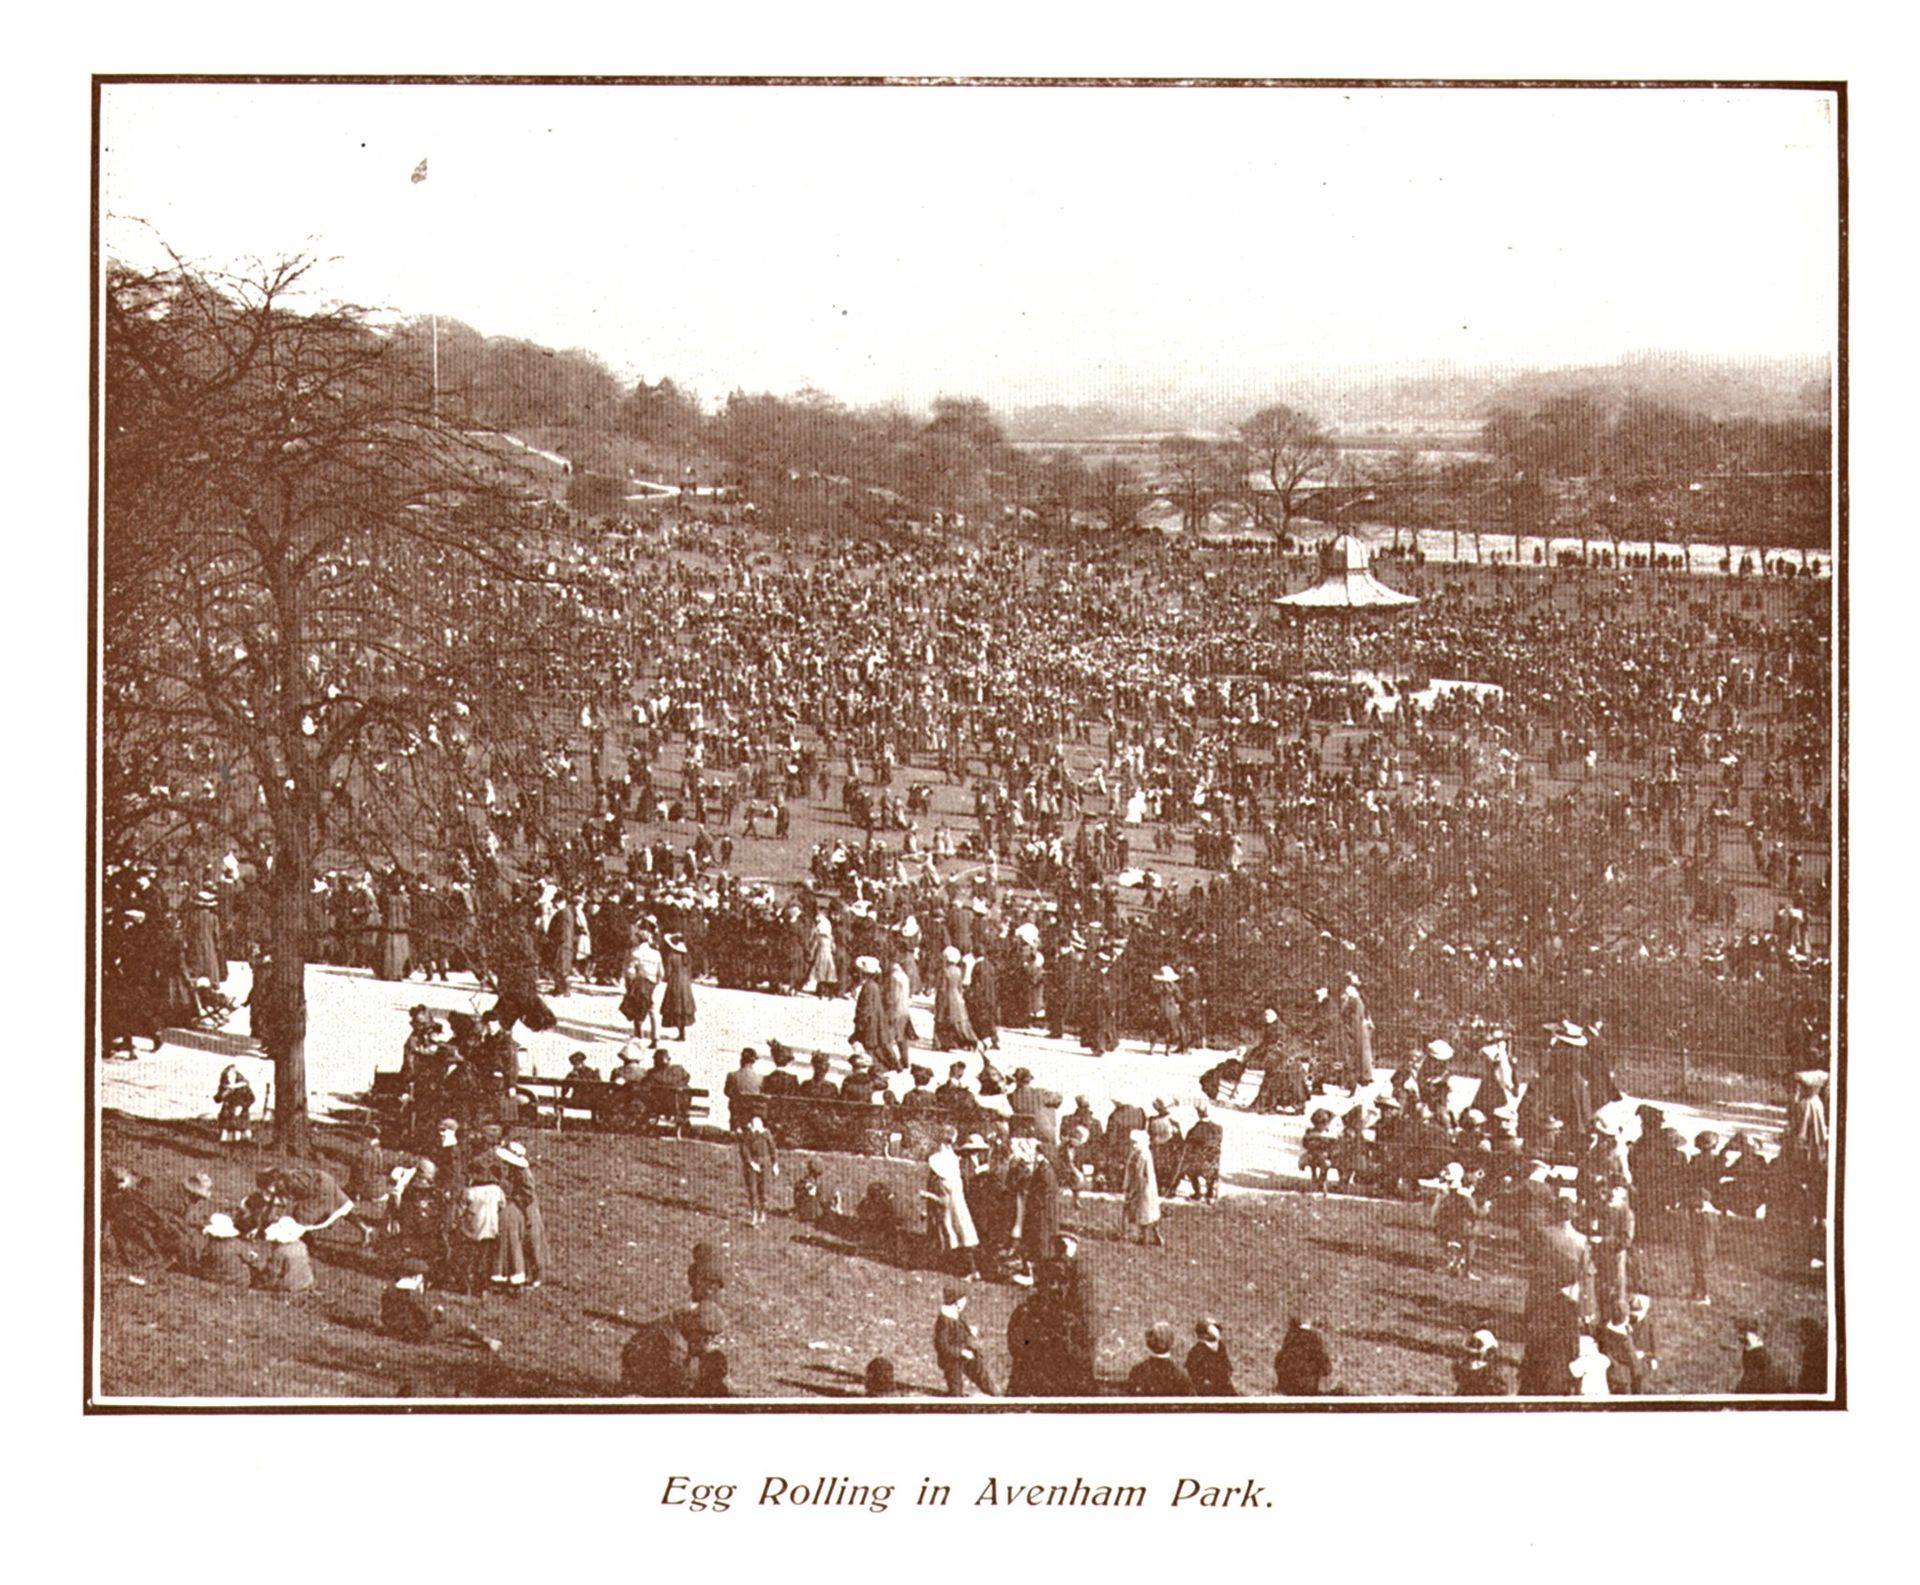 Archive image of people rolling eggs down the hill